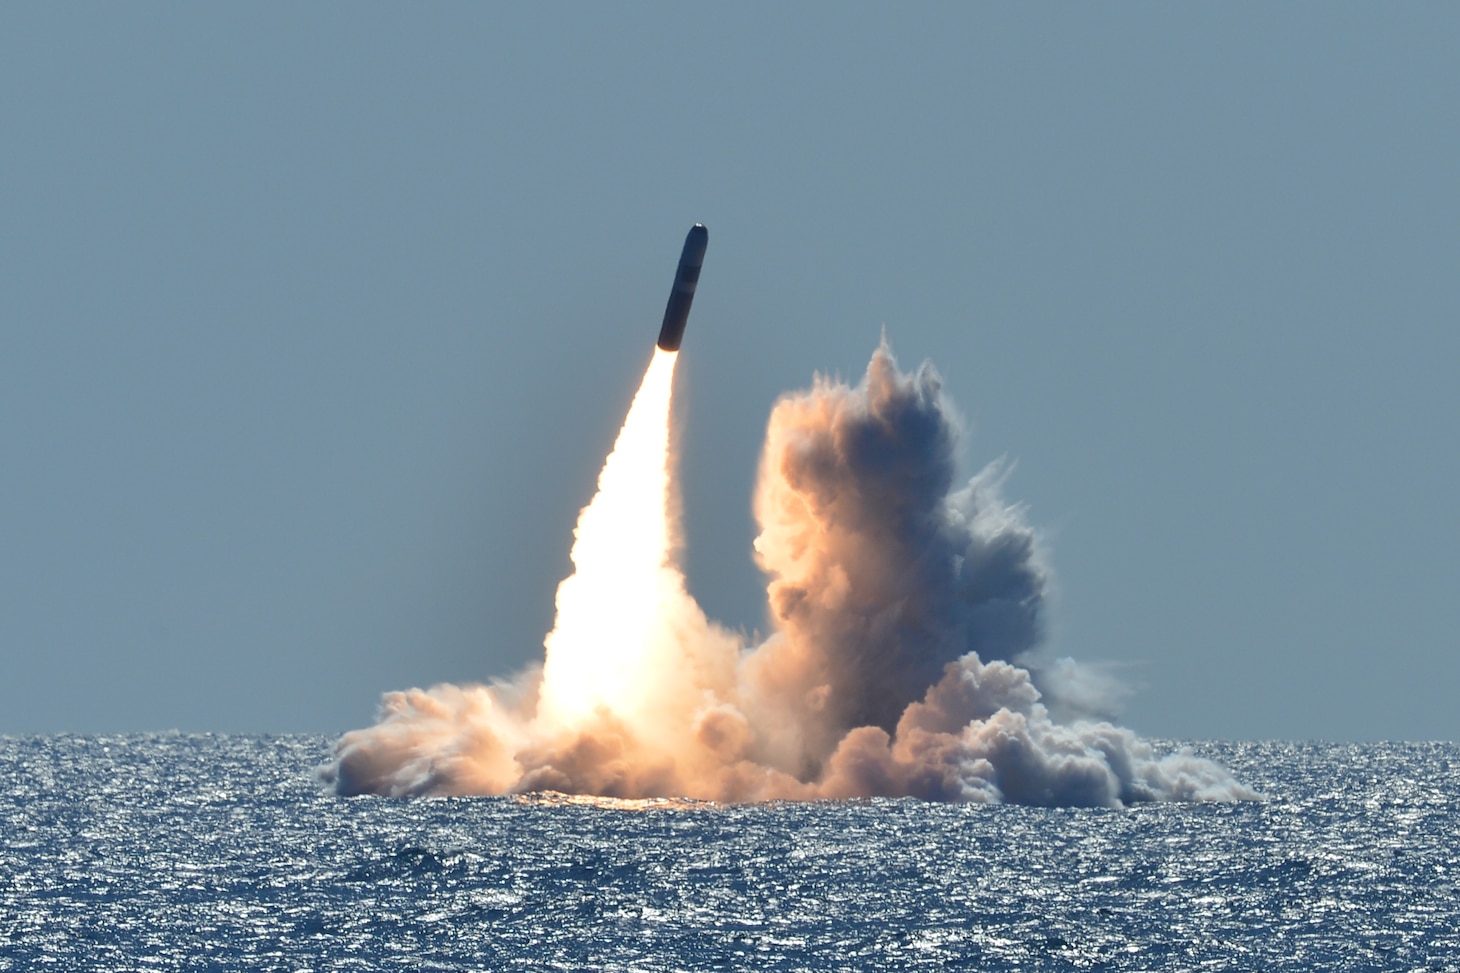 180326-N-UK333-005 PACIFIC OCEAN (March 26, 2008) An unarmed Trident II D5 missile launches from the Ohio-class ballistic missile submarine USS Nebraska (SSBN 739) off the coast of California. The test launch was part of the U.S. Navy Strategic Systems Program’s demonstration and shakedown operation certification process. The successful launch certified the readiness of an SSBN crew and the operational performance of the submarine’s strategic weapons system before returning to operational availability. (U.S. Navy photo by Mass Communication Specialist 1st Class Ronald Gutridge/Released)